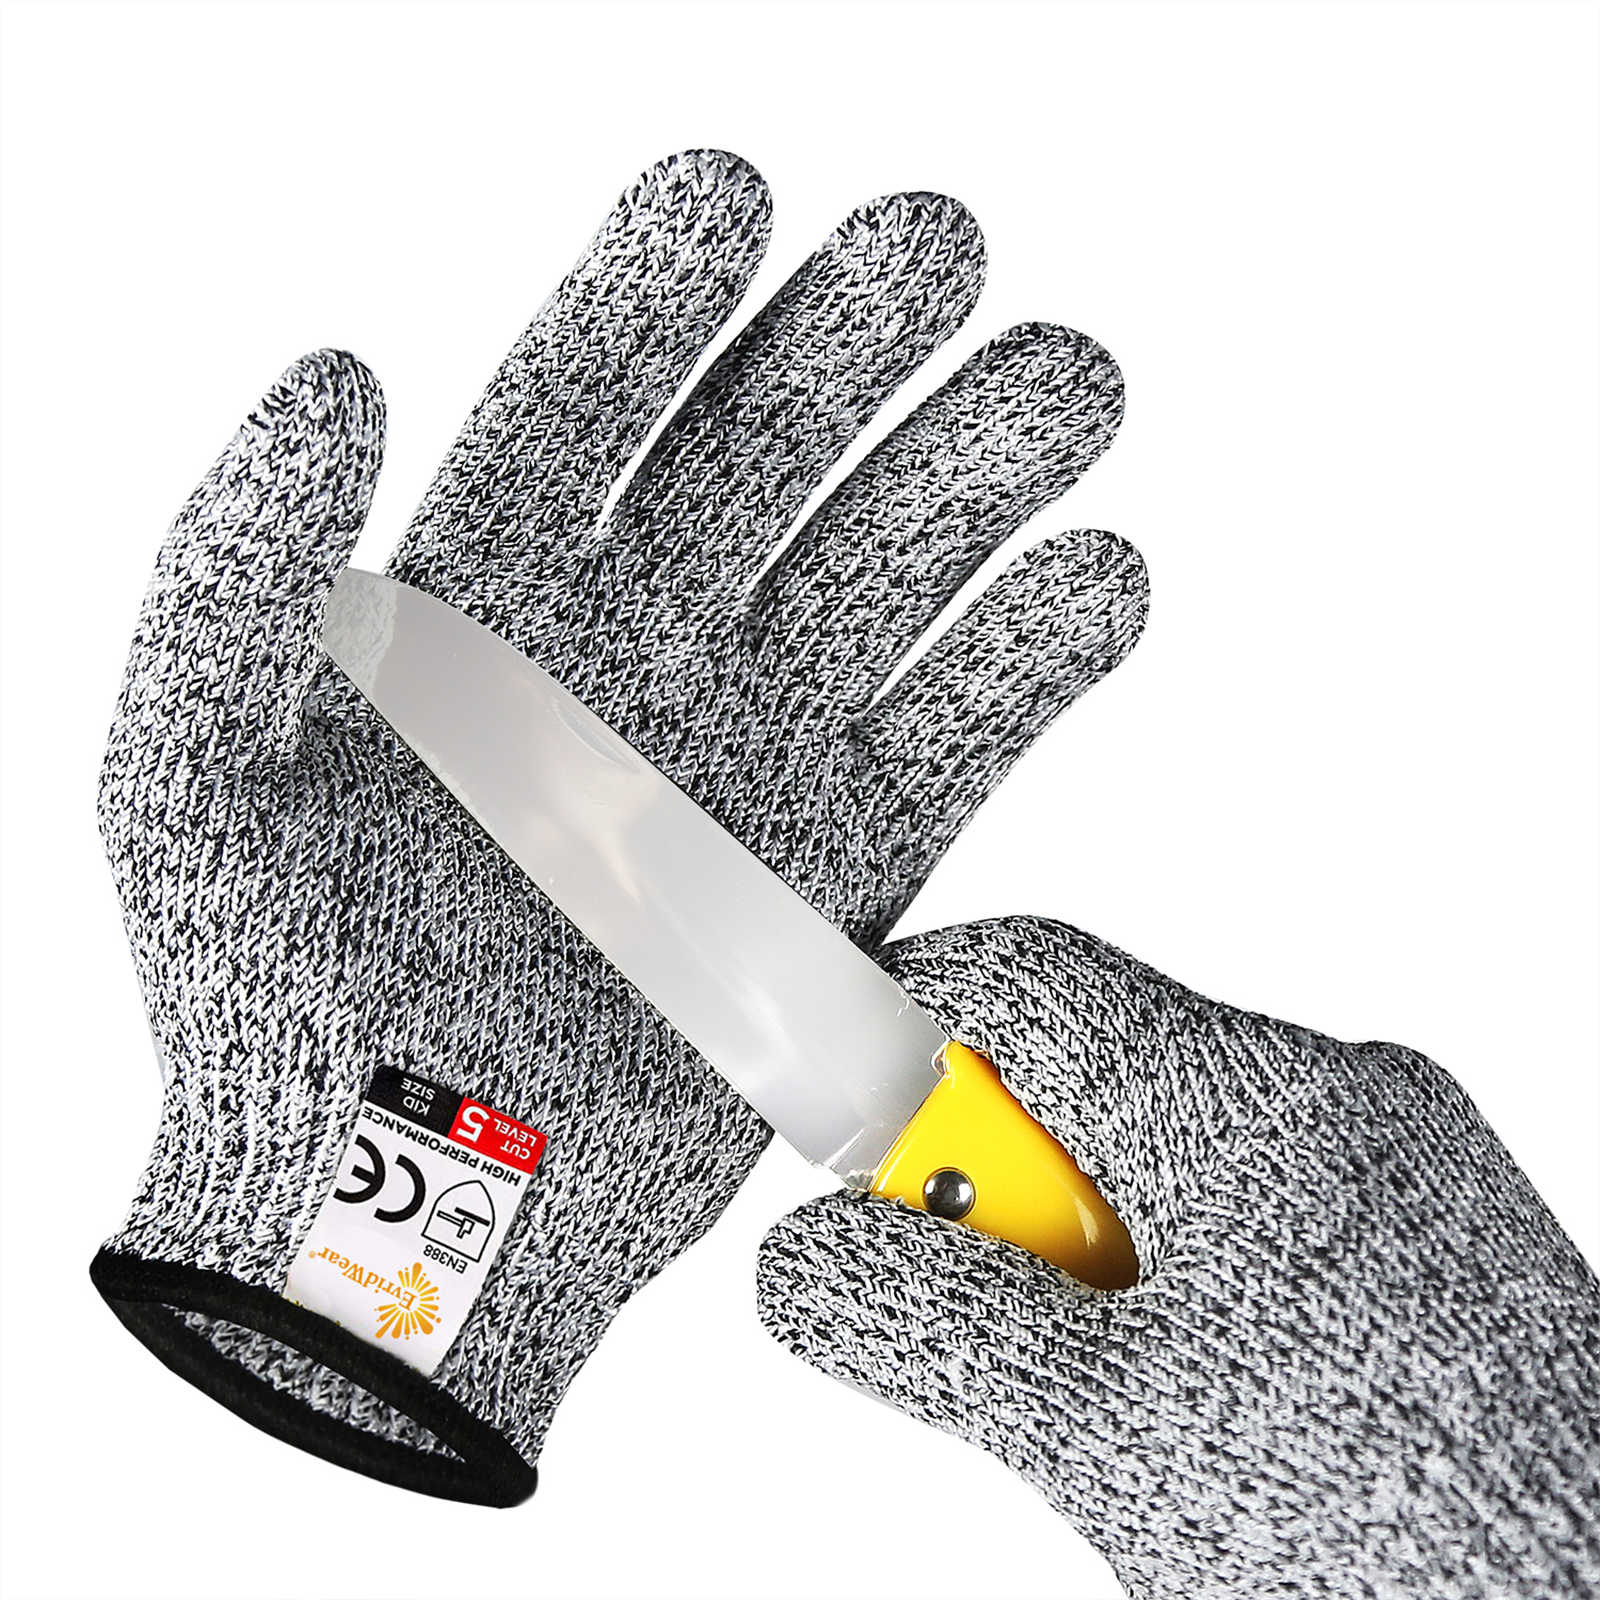 1pair Kids Cutting Glove Cut Resistant Safety Glove For Cooking